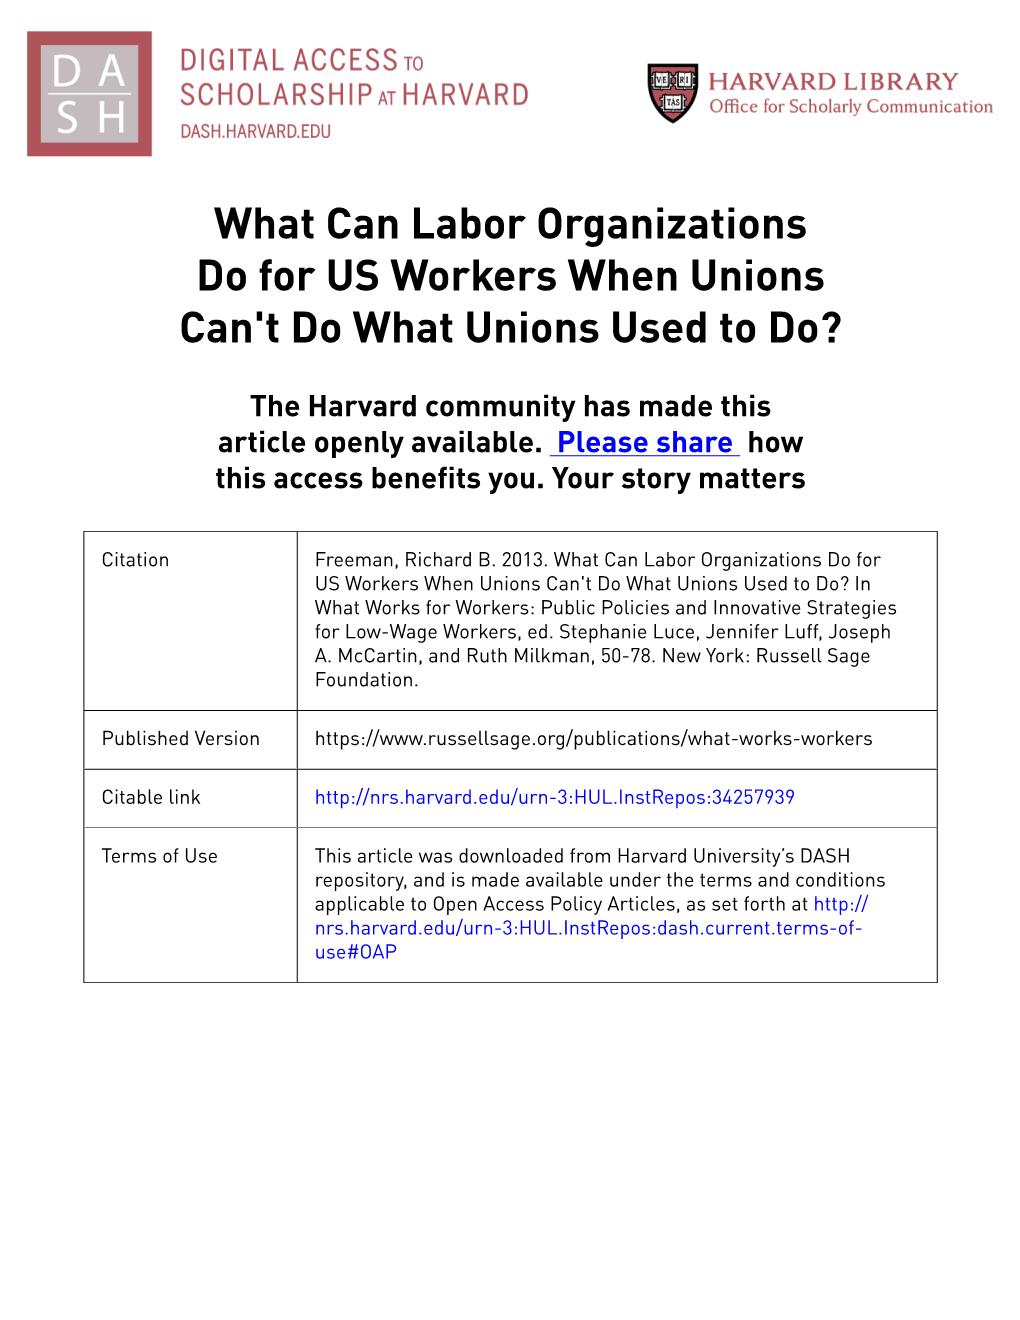 FINAL-MS What Can Labor Orgs Do for US Workers When They Cant Do